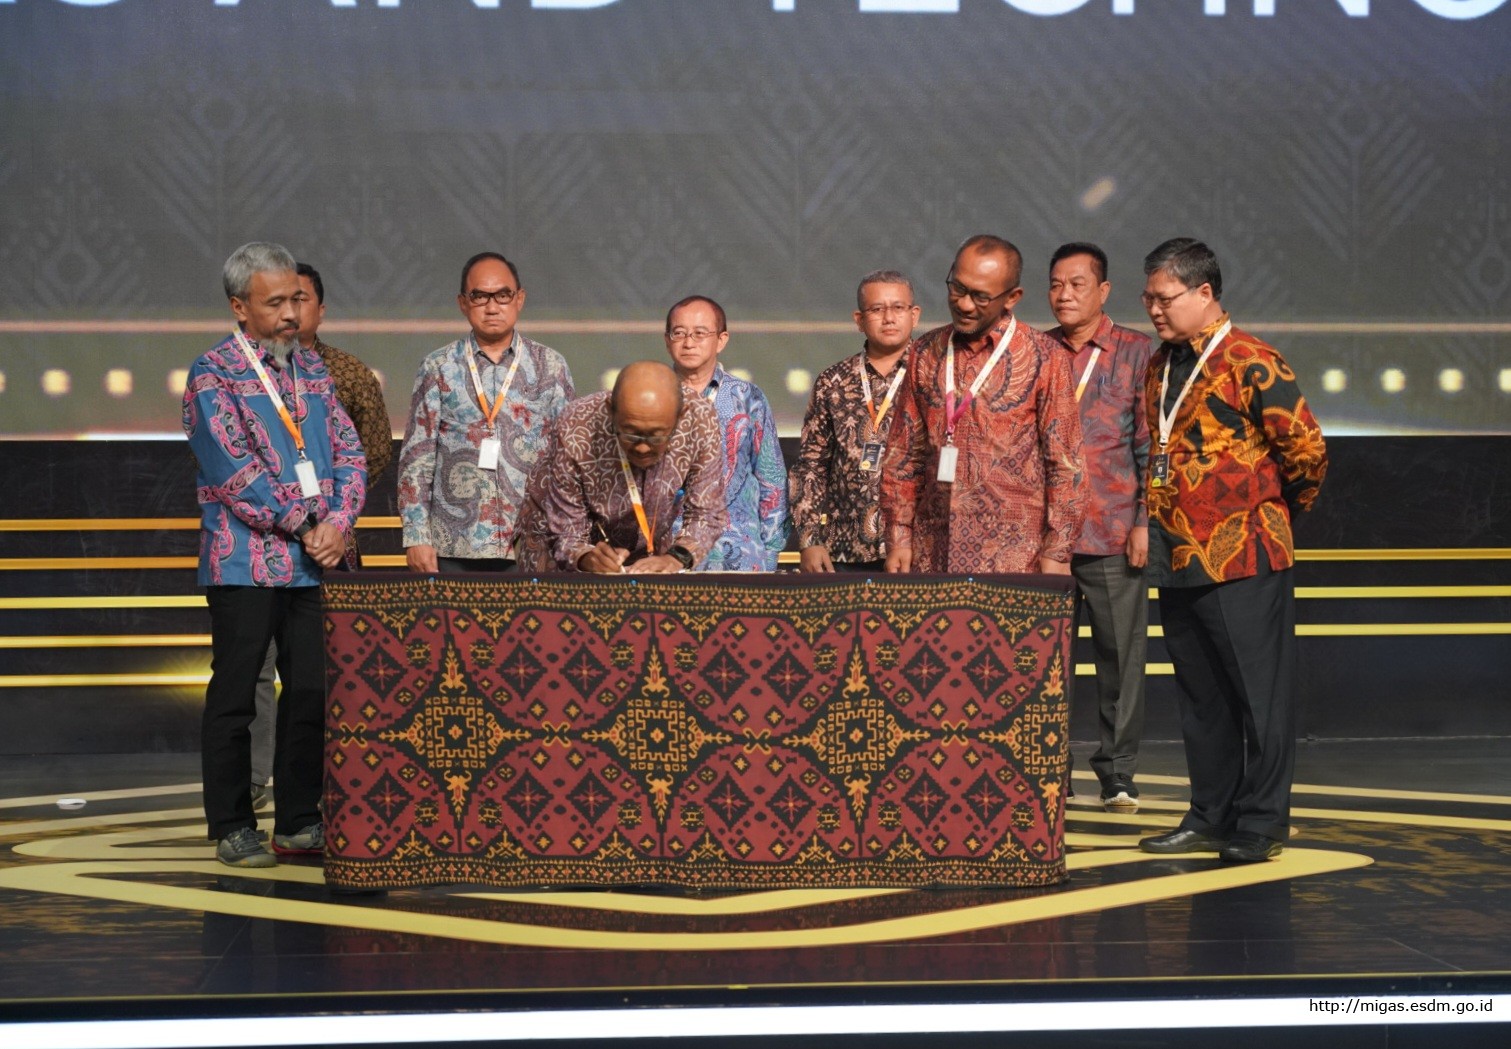 The 3rd International Convention on Indonesian Upstream Oil and Gas (IOG)